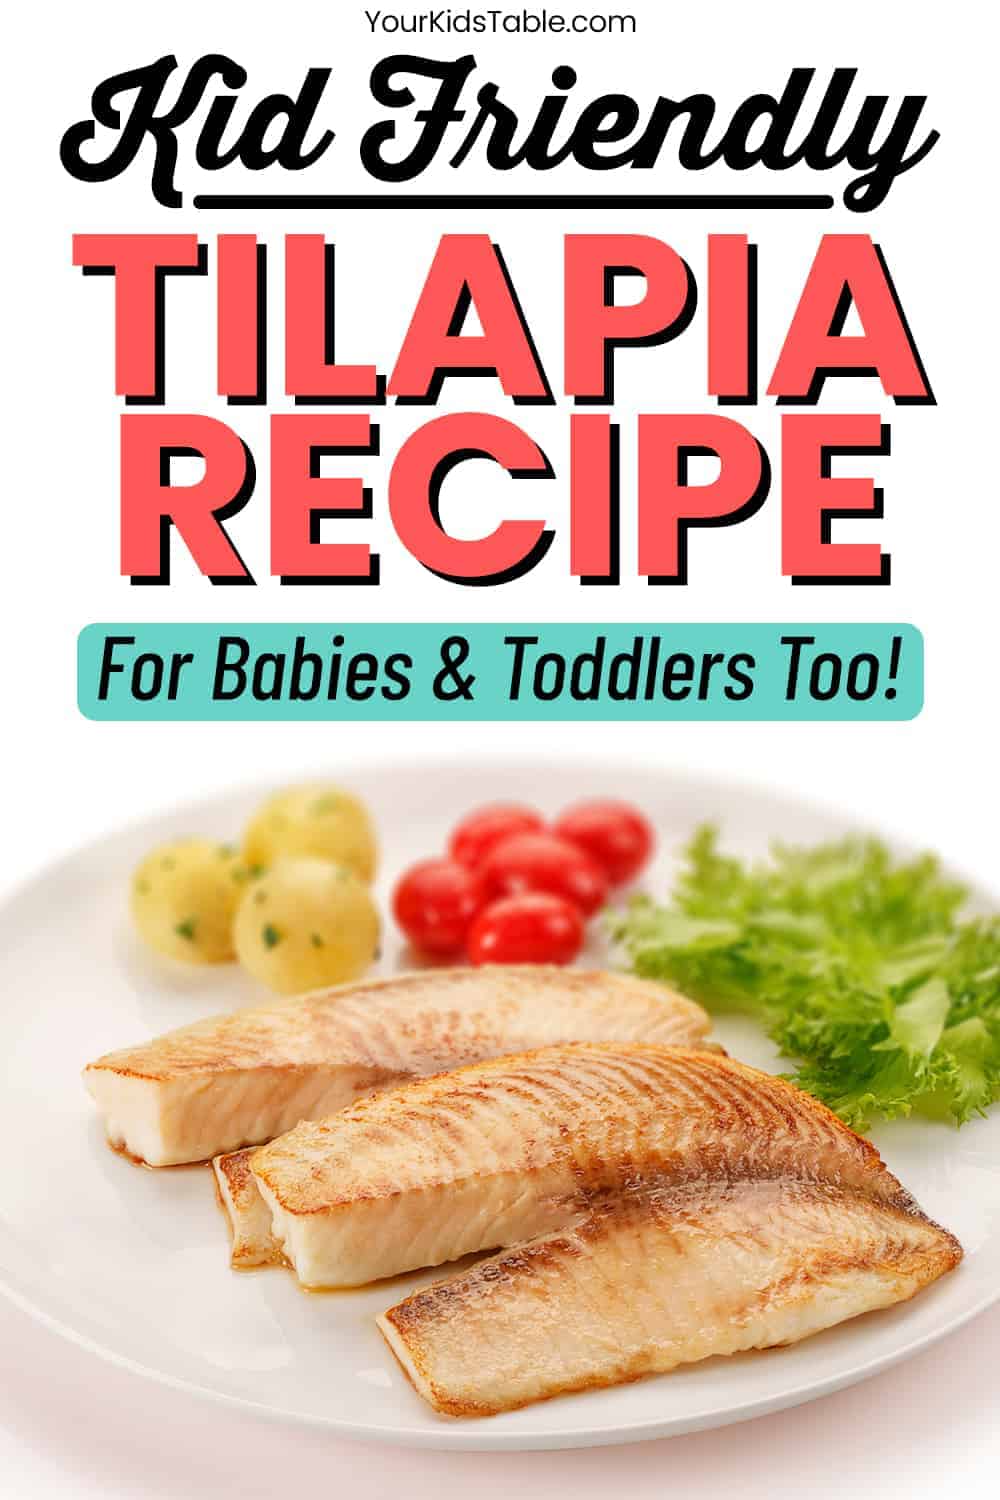 Even your picky eater will love this kid-friendly fish recipe! Learn the health benefits of fish for kids and how to make this delicious tilapia recipe.